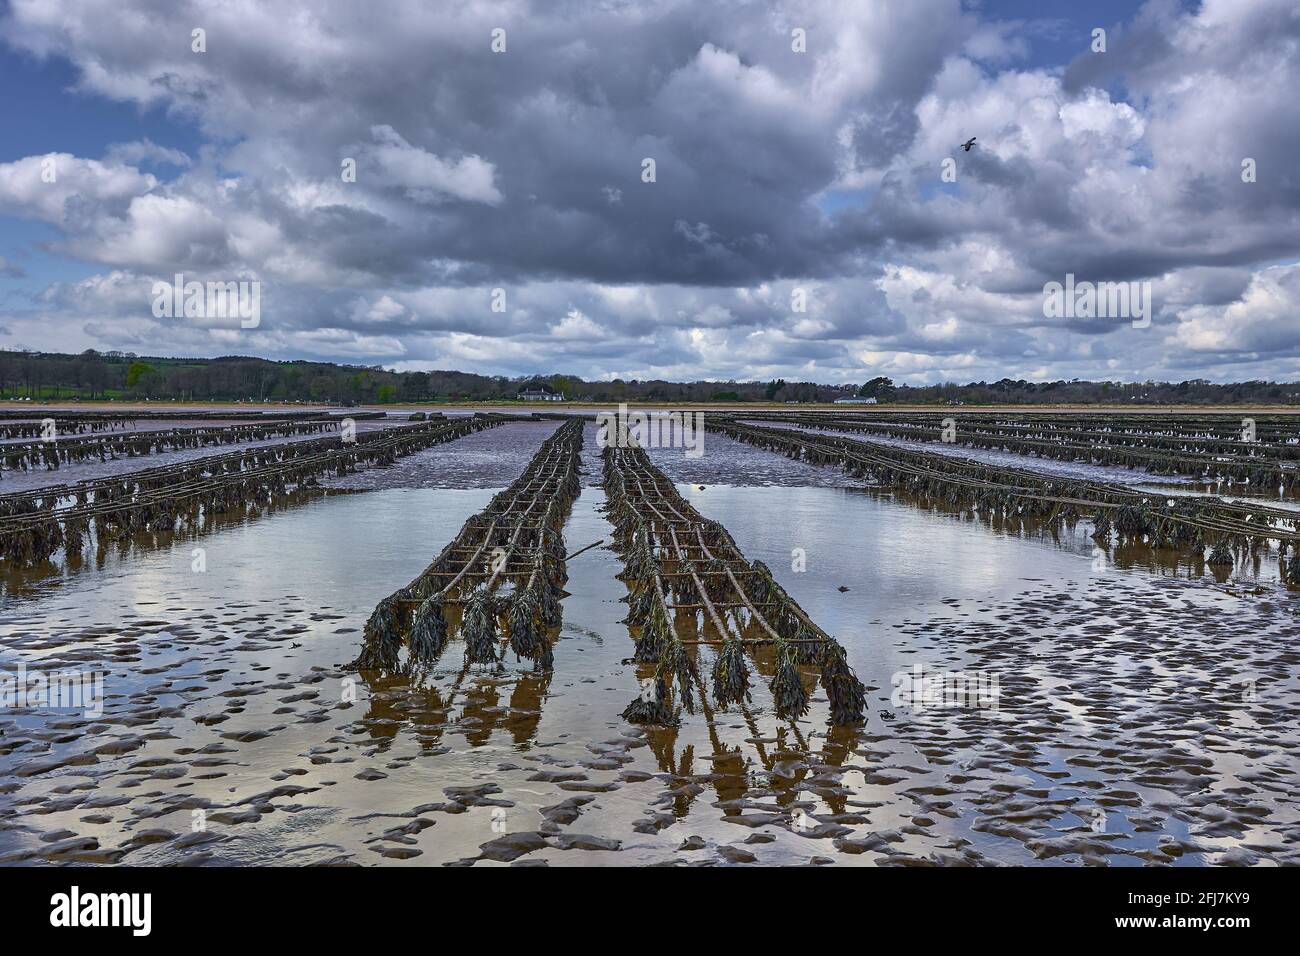 production of oysters on the high seas, mollusc fish farm. Animal production for feeding Stock Photo